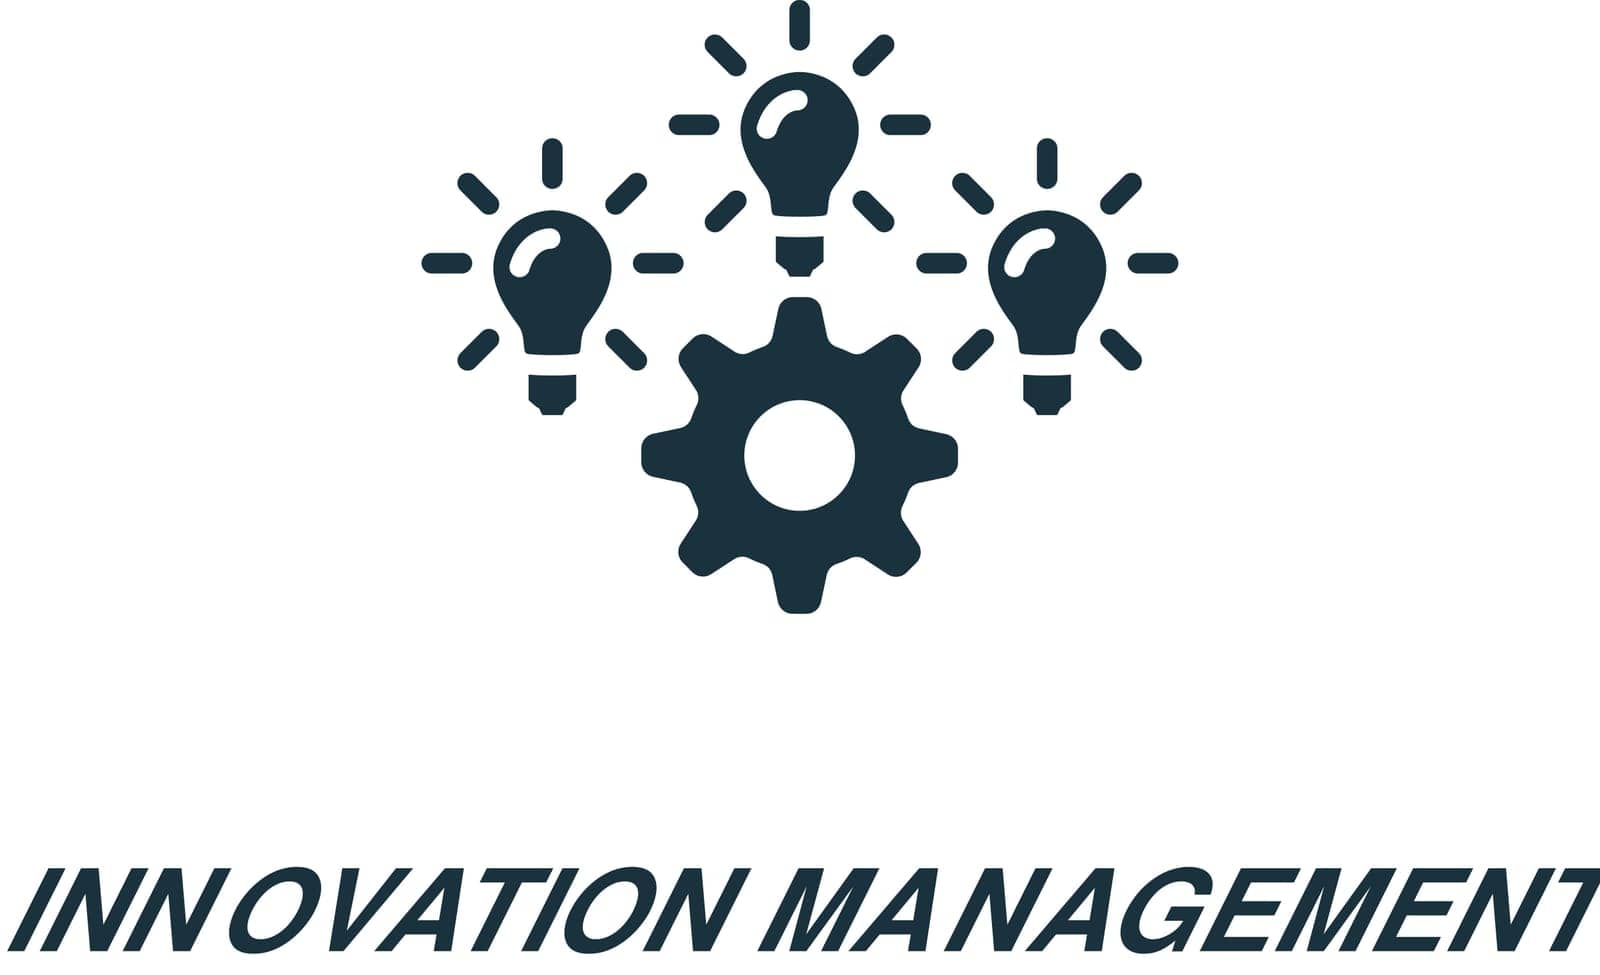 Innovation management icon. Monochrome simple sign from business concept collection. Innovation management icon for logo, templates, web design and infographics. by simakovavector